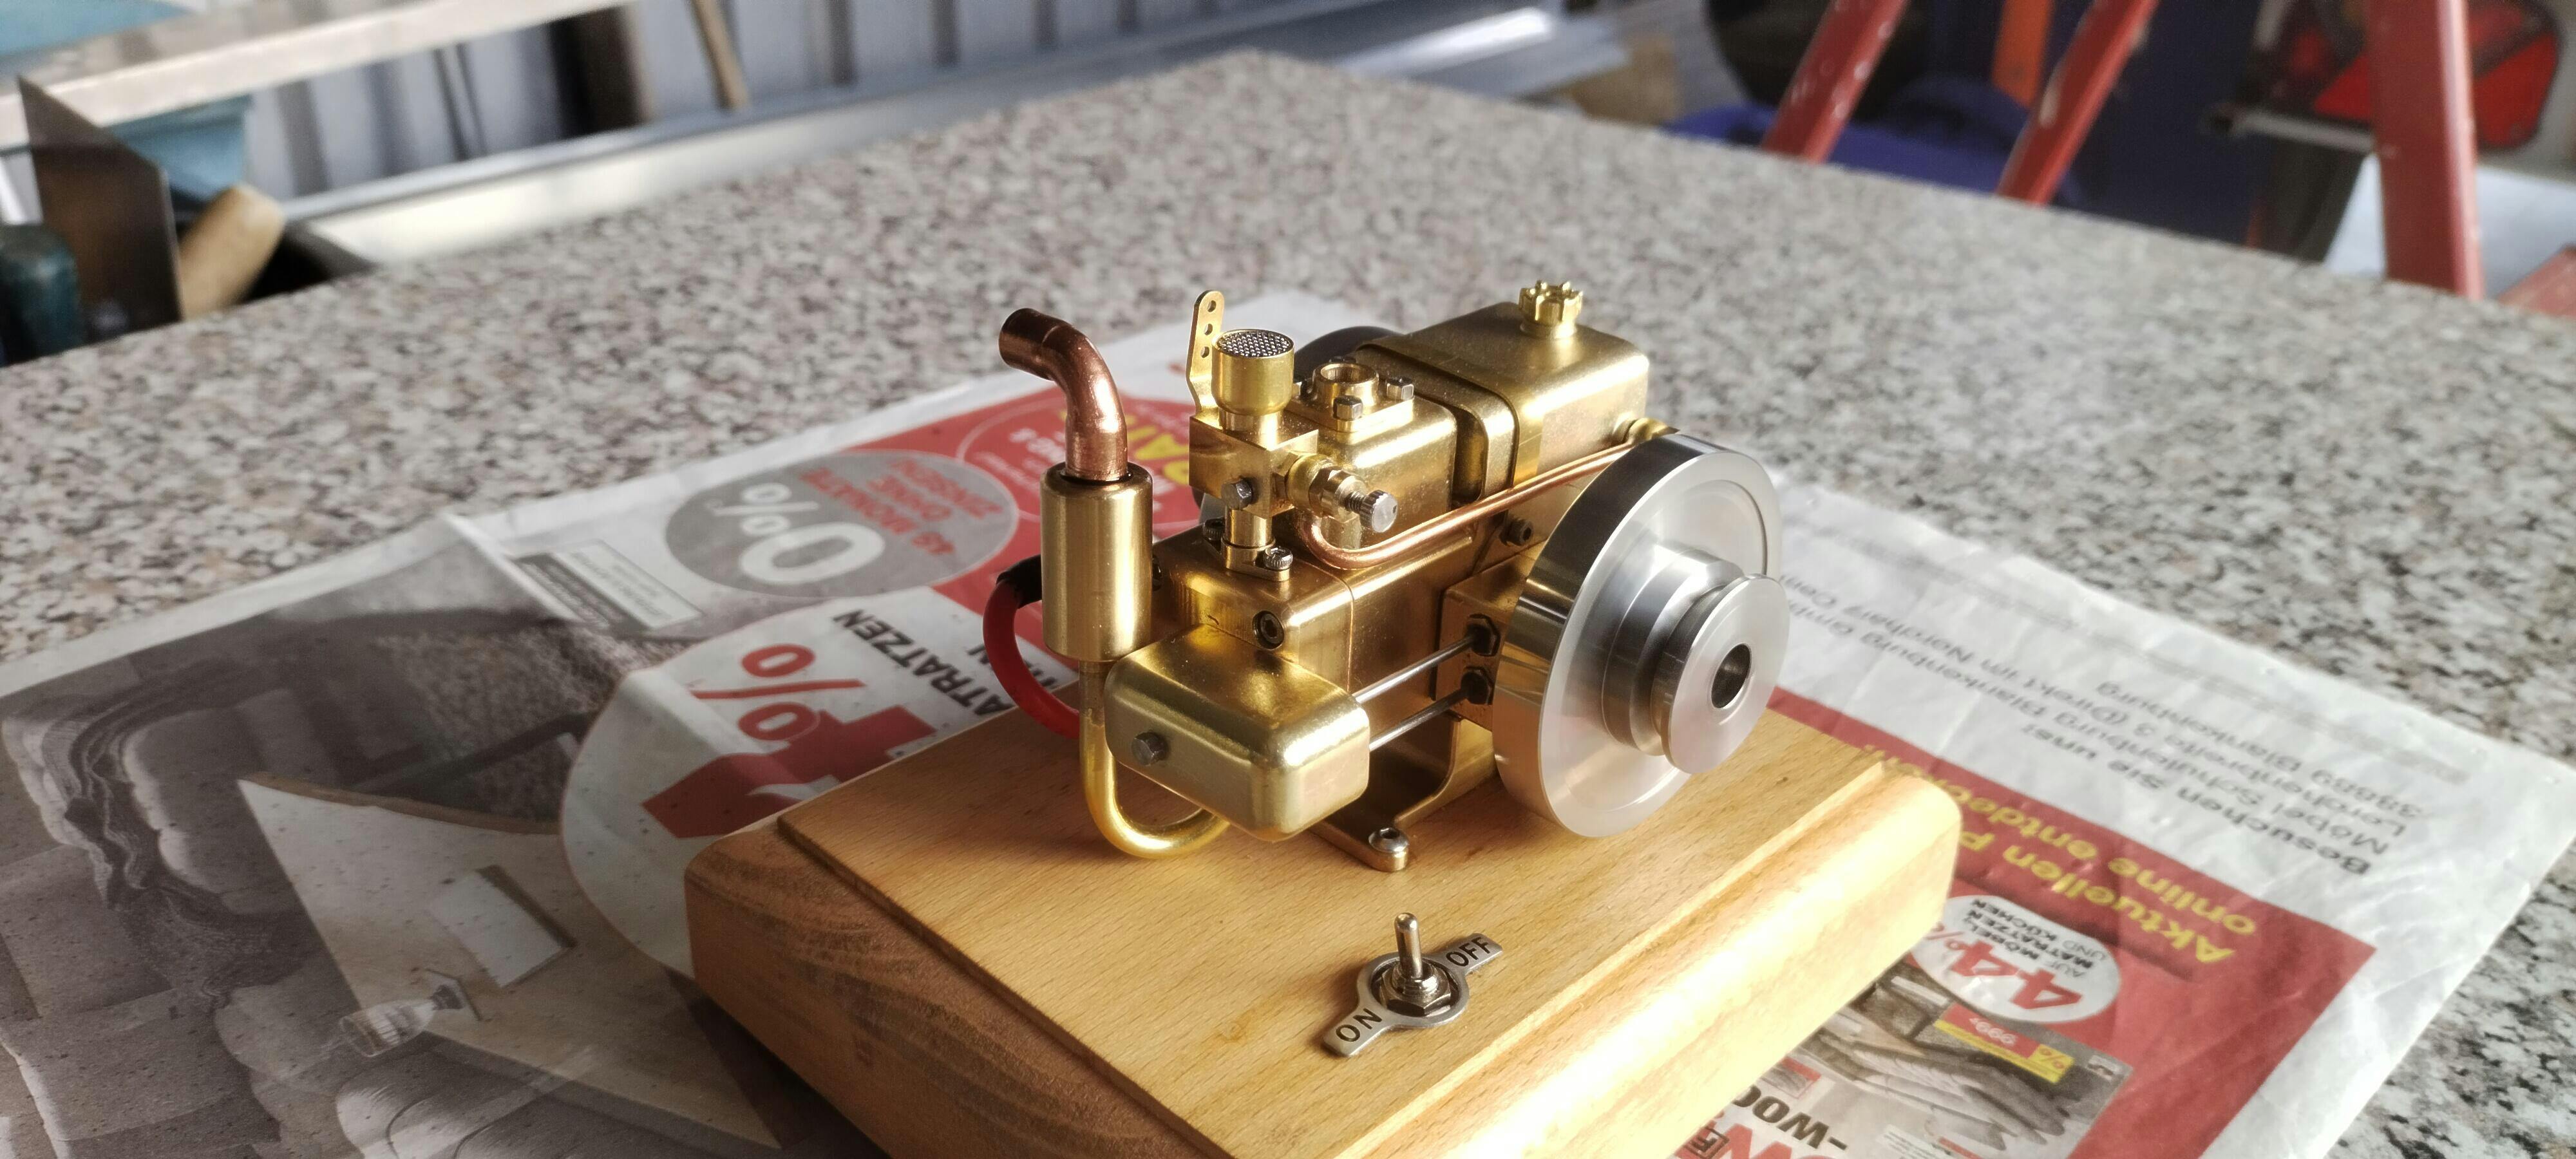 1.6cc Mini Retro Gas Engine: Water-Cooled, 4-Stroke Model for Display or Collection photo review